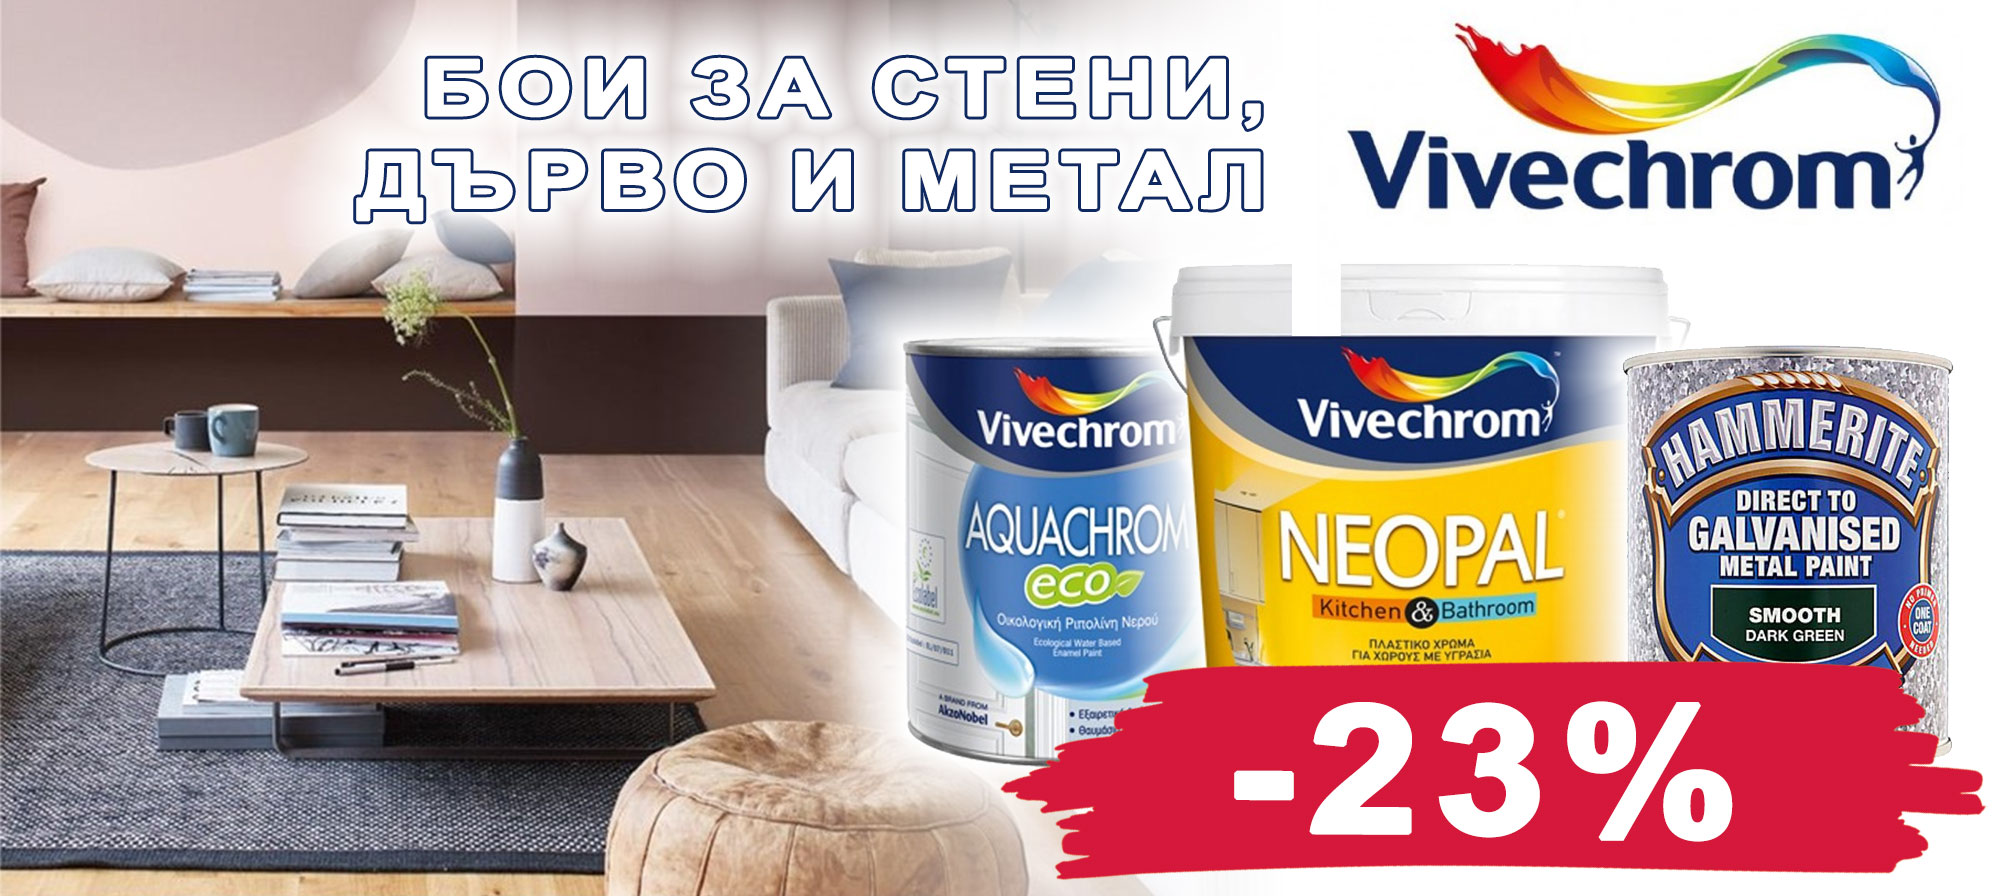 VIVECHROM paints with 23% discount